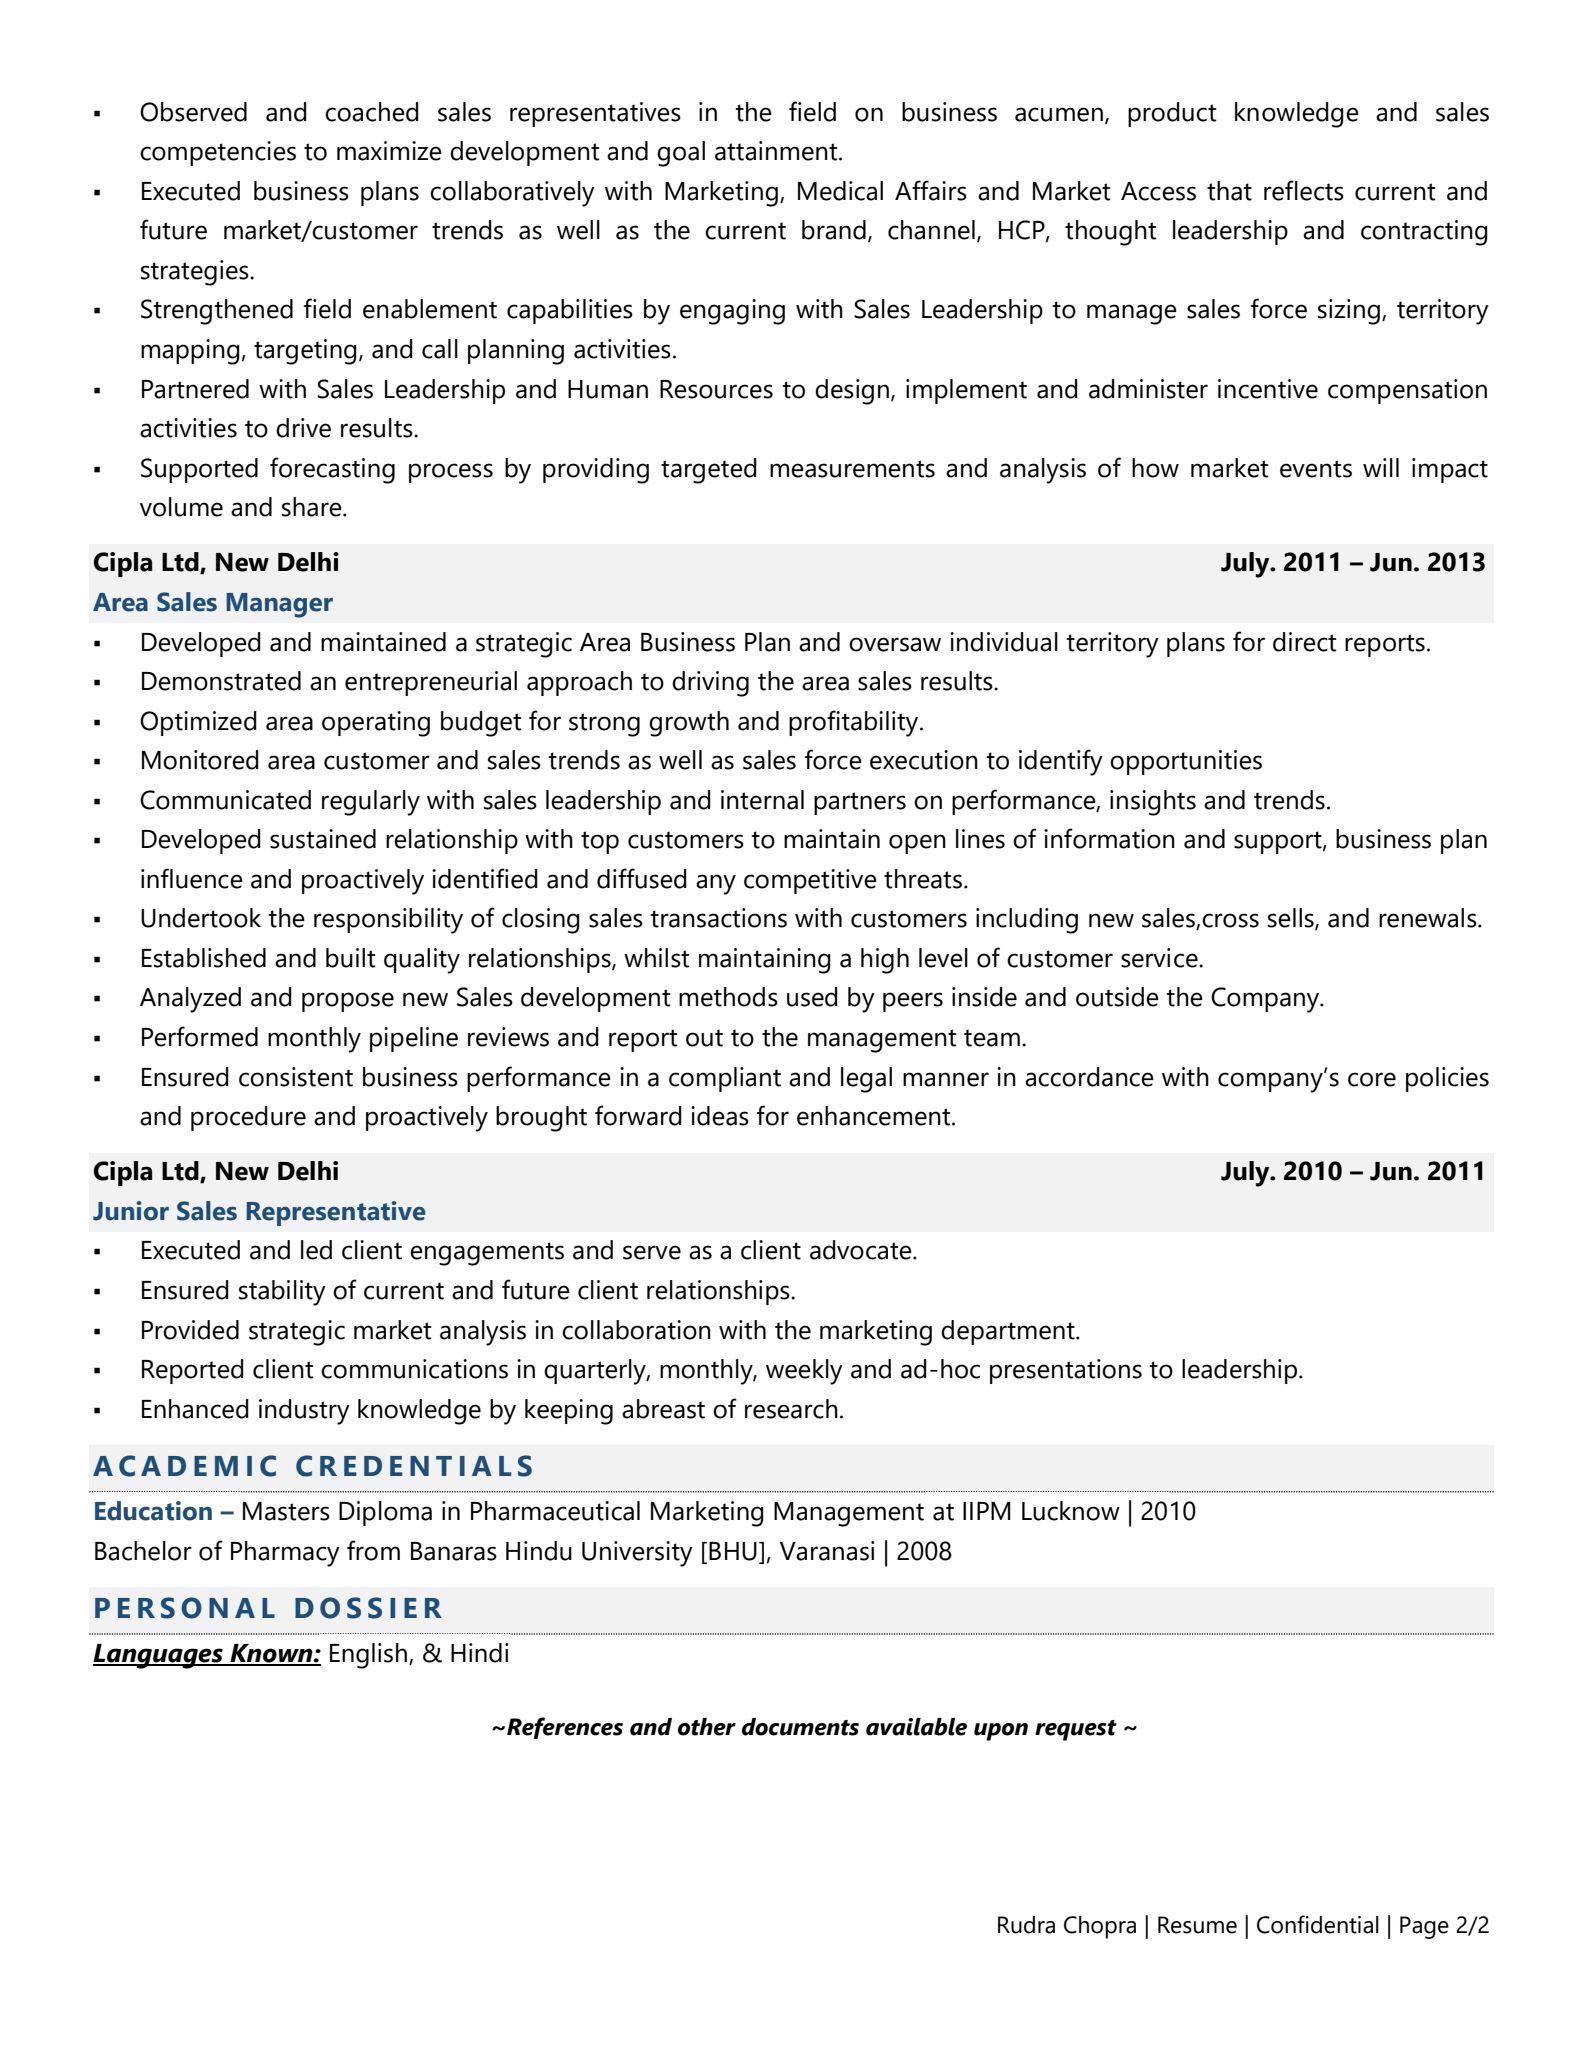 National Director of Sales (Pharma) - Resume Example & Template